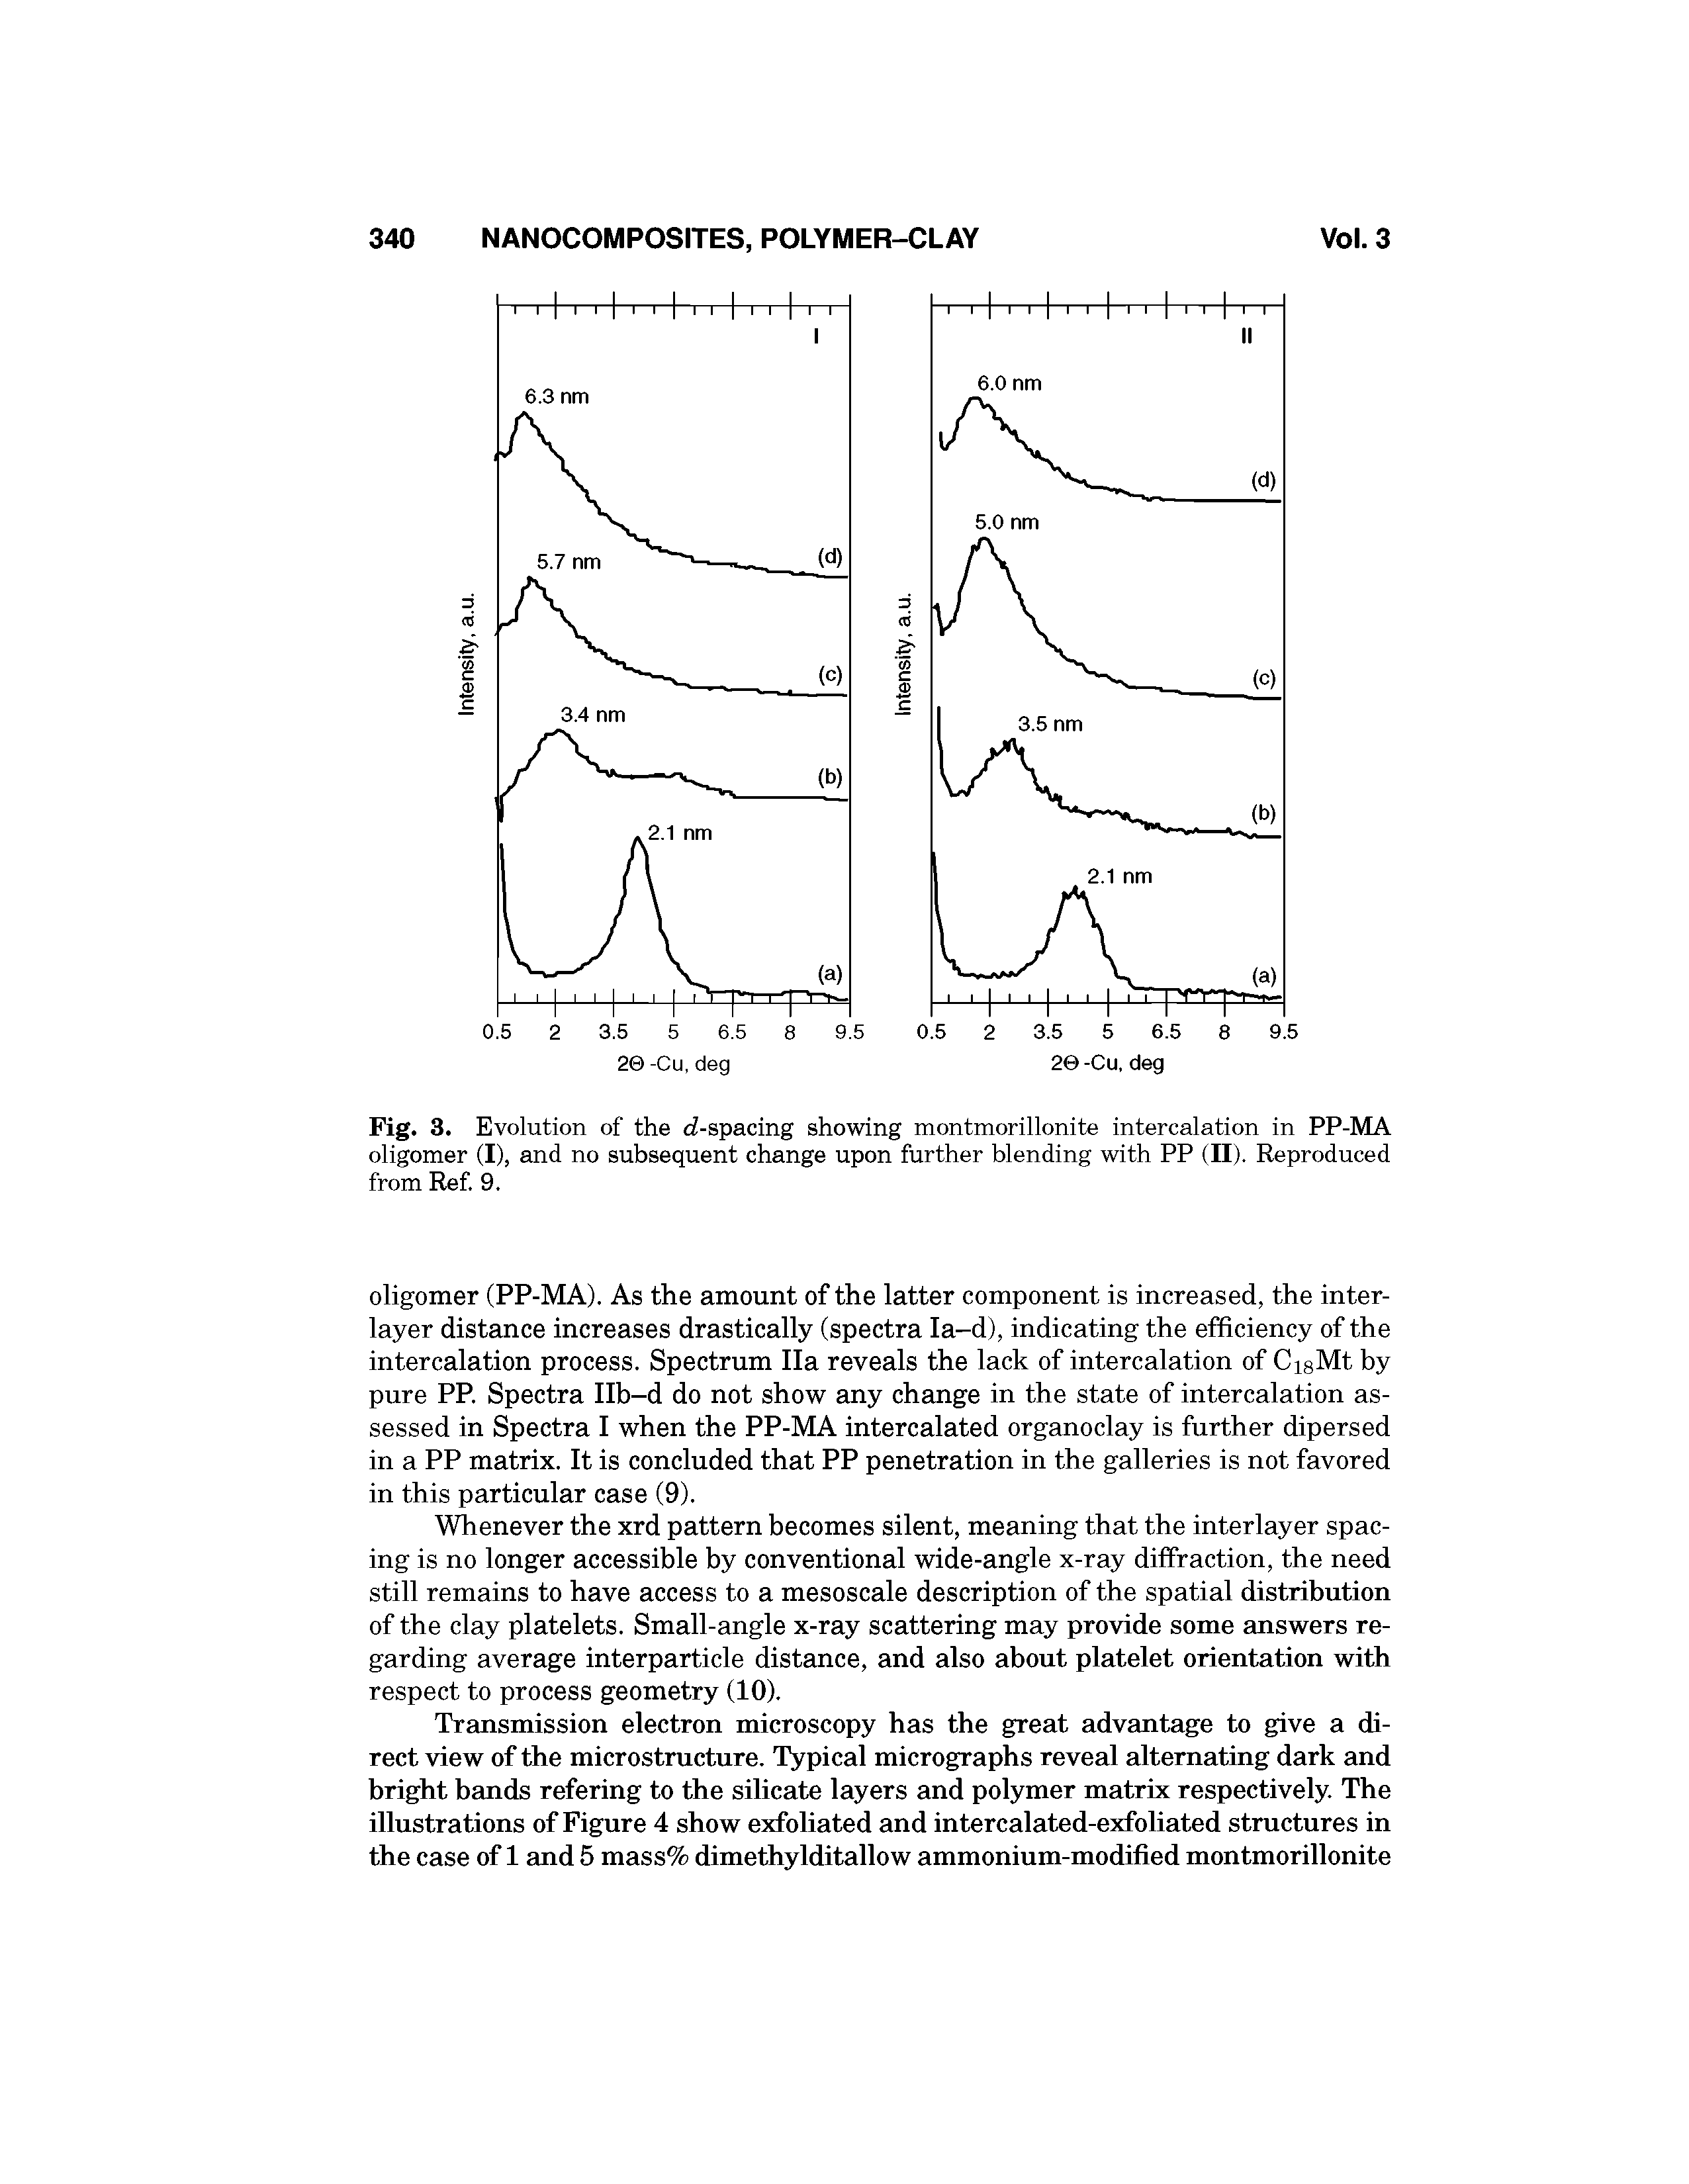 Fig. 3. Evolution of the d-spacing showing montmorillonite intercalation in PP-MA oligomer (I), and no subsequent change upon further blending with PP (II). Reproduced from Ref 9.